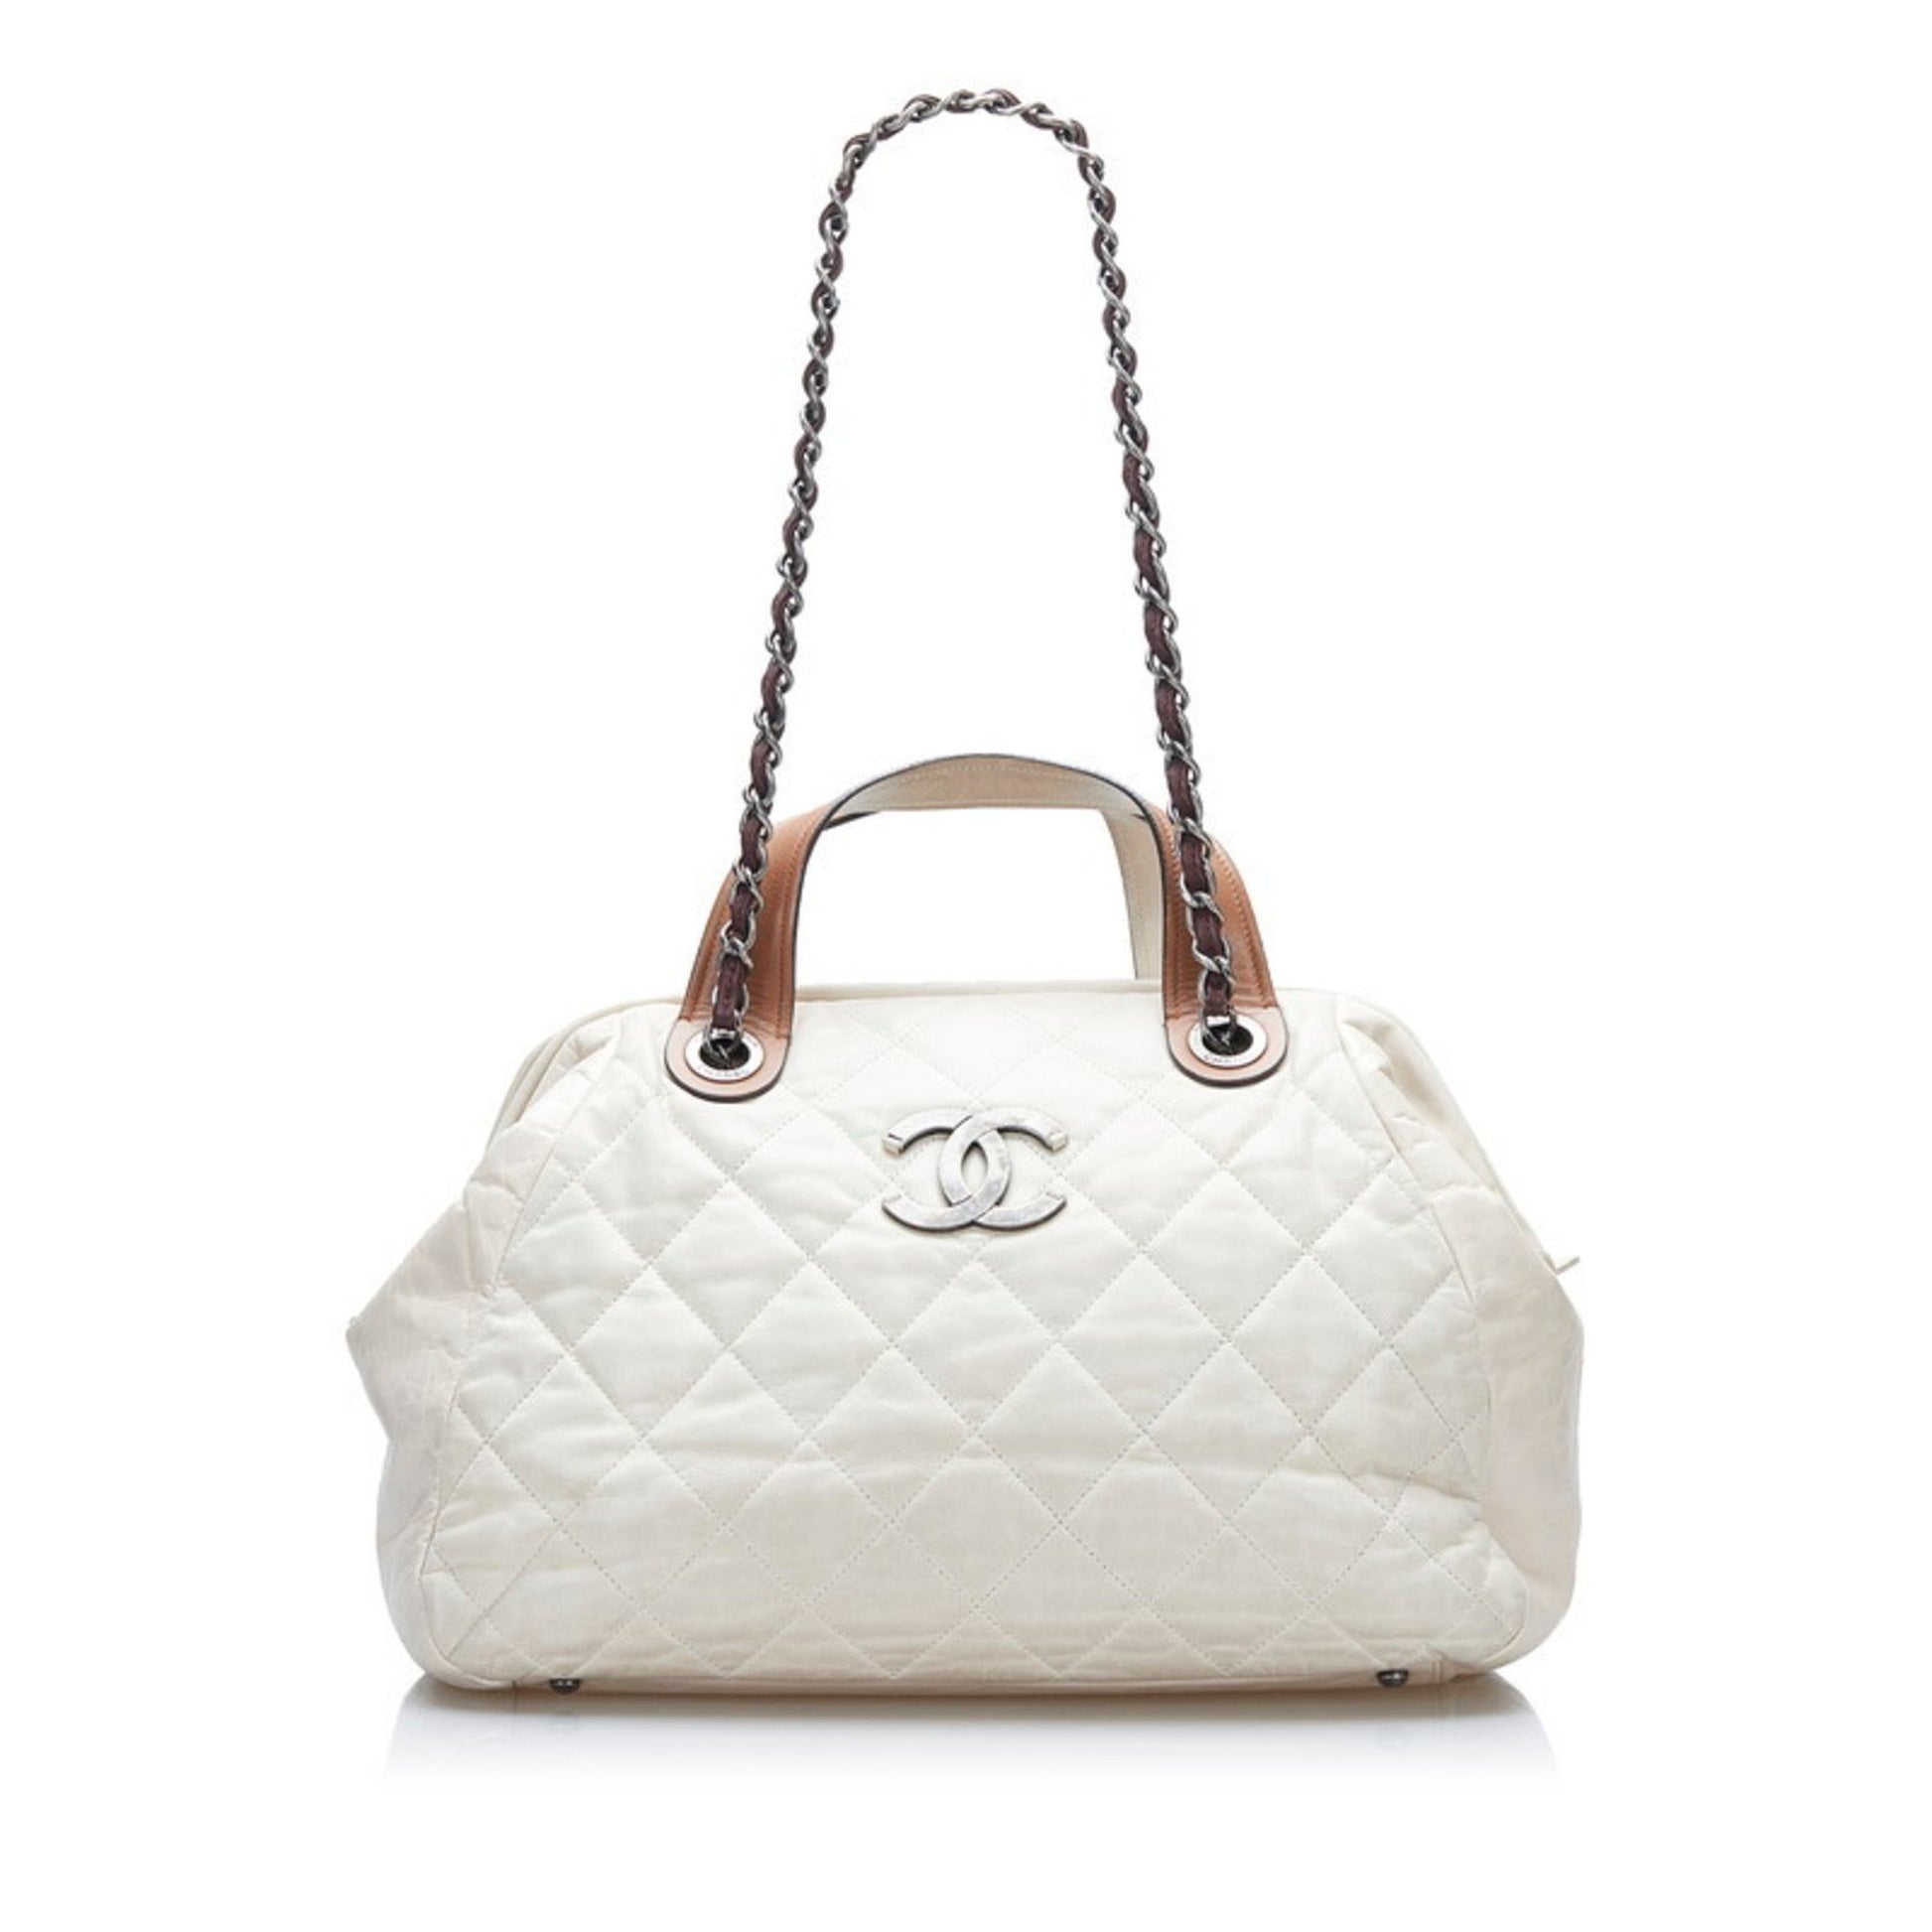 CHANEL, Bags, Chanel Boy Here Mark Shoulder Bag Chain Leather Ivory